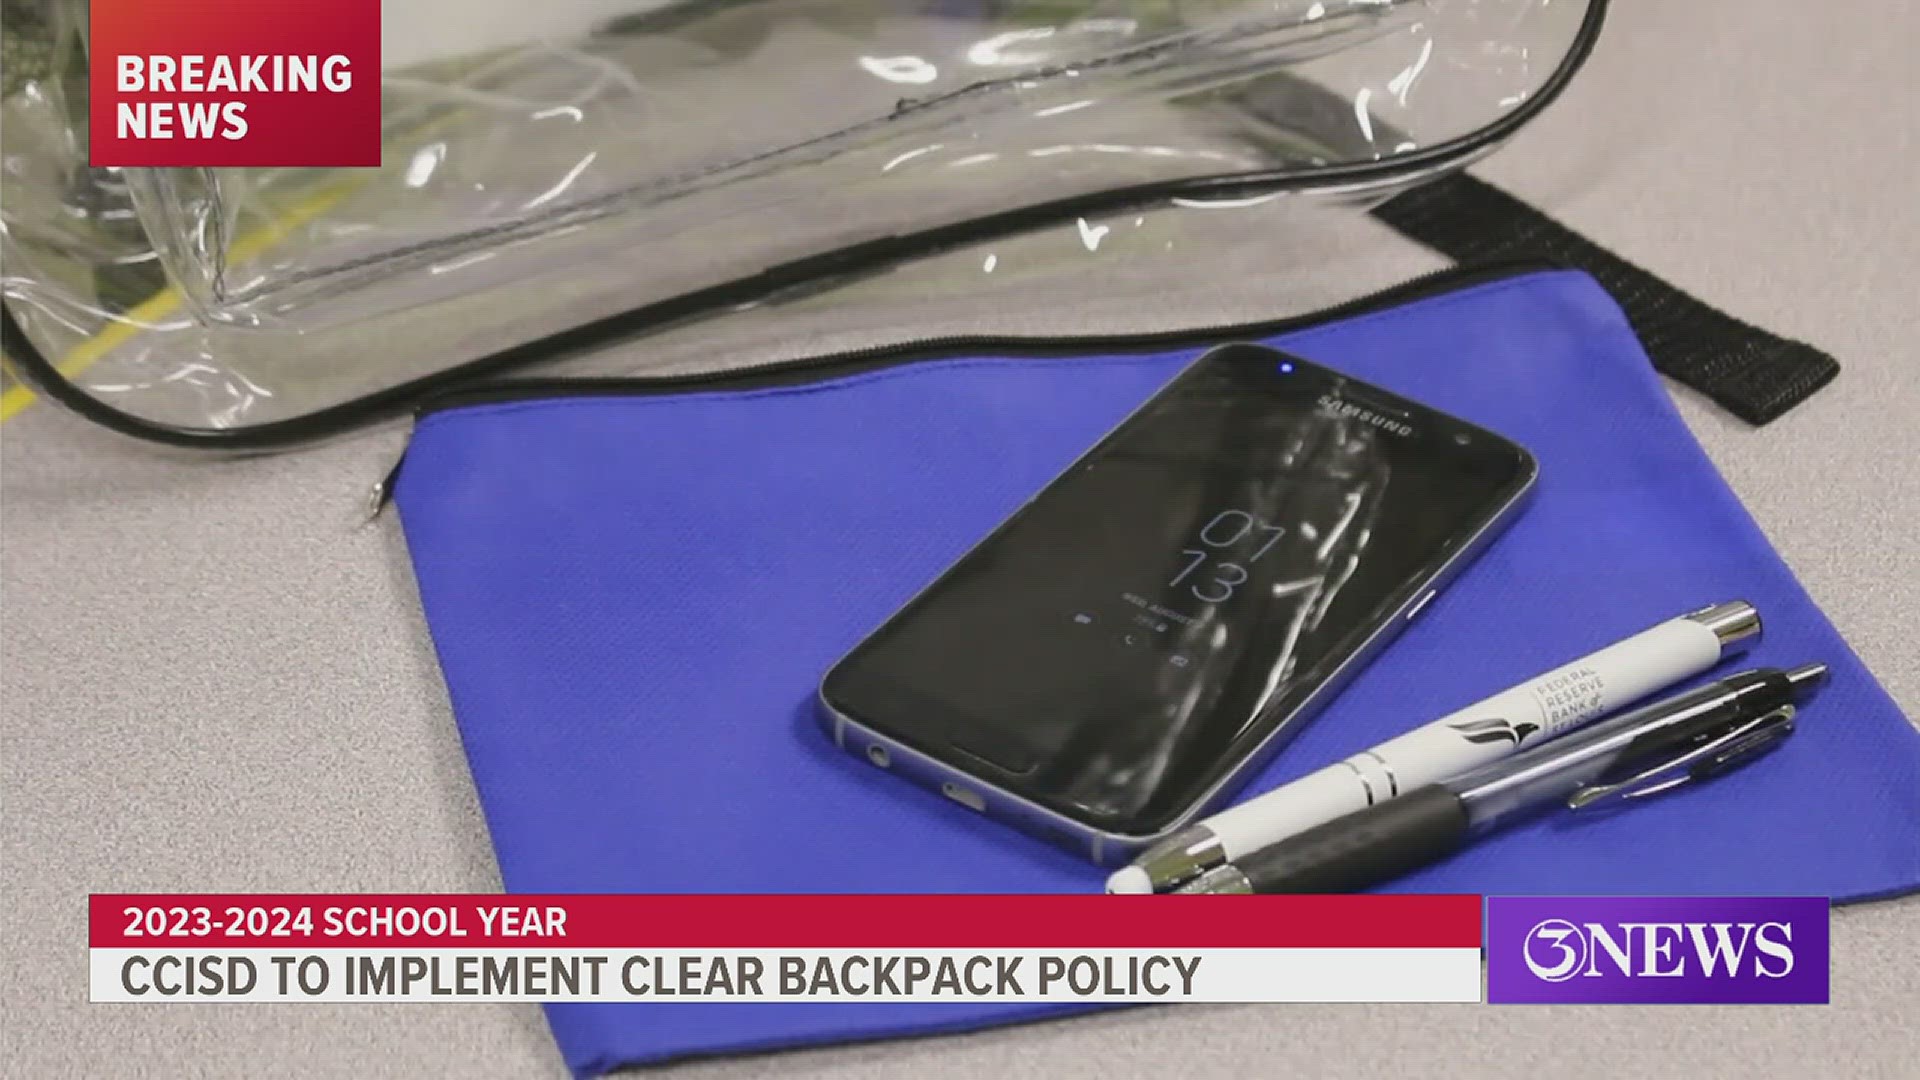 District officials said this is a way to prevent students from bringing weapons to campus, vape materials and things that should not be brought to school.